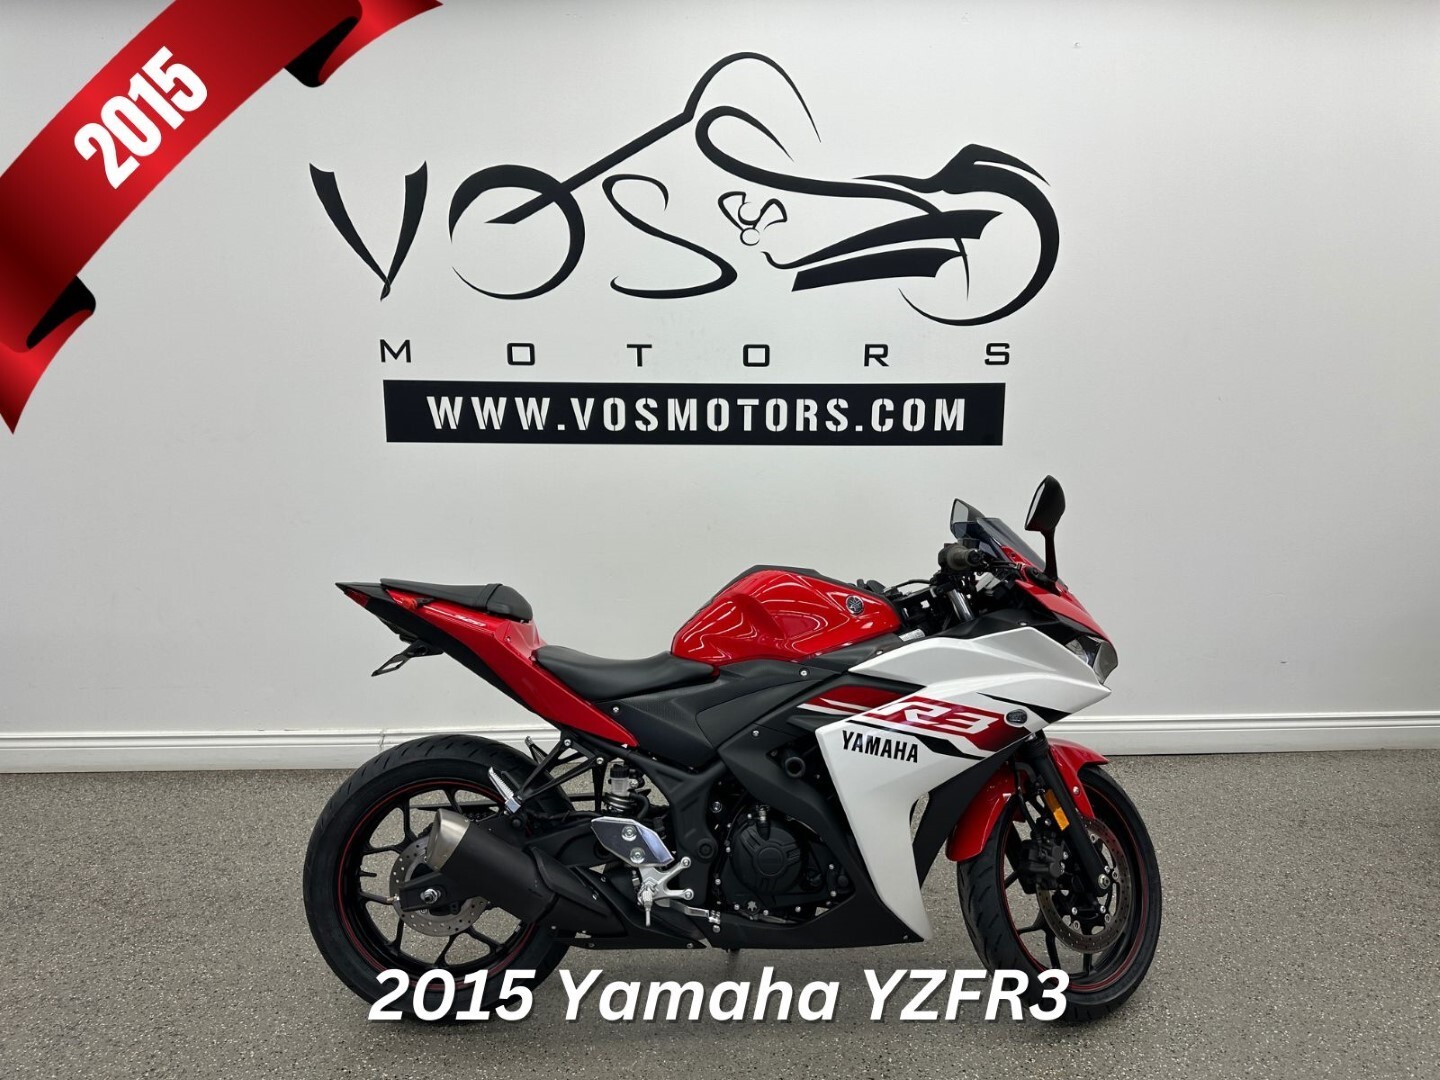 2015 Yamaha YZFR3FR YZF R3 - V5997NP - -No Payments for 1 Year**